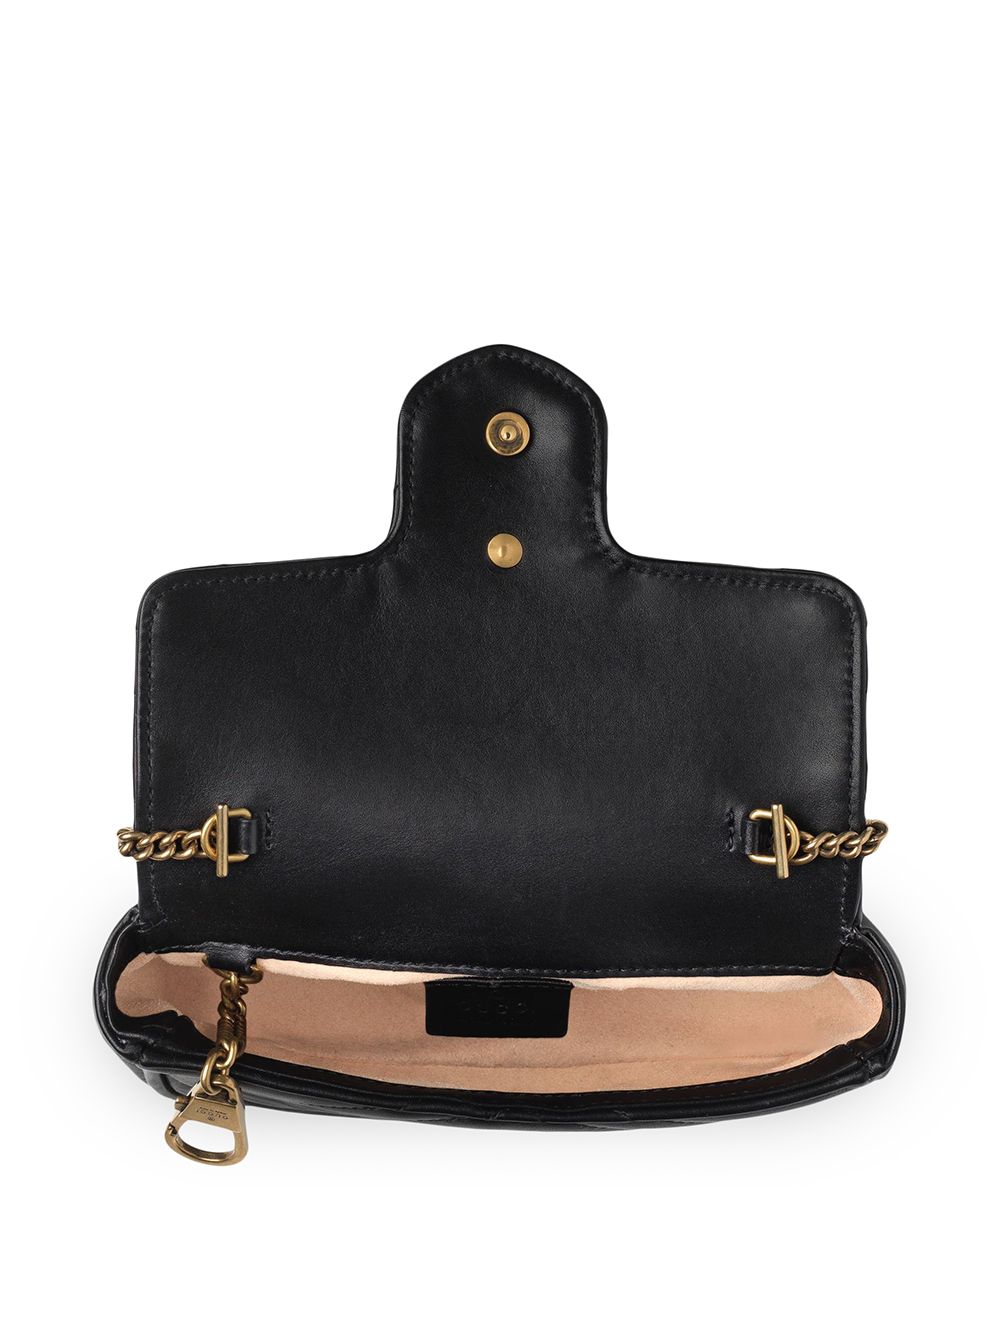 The Gucci Marmont for Women - Farfetch